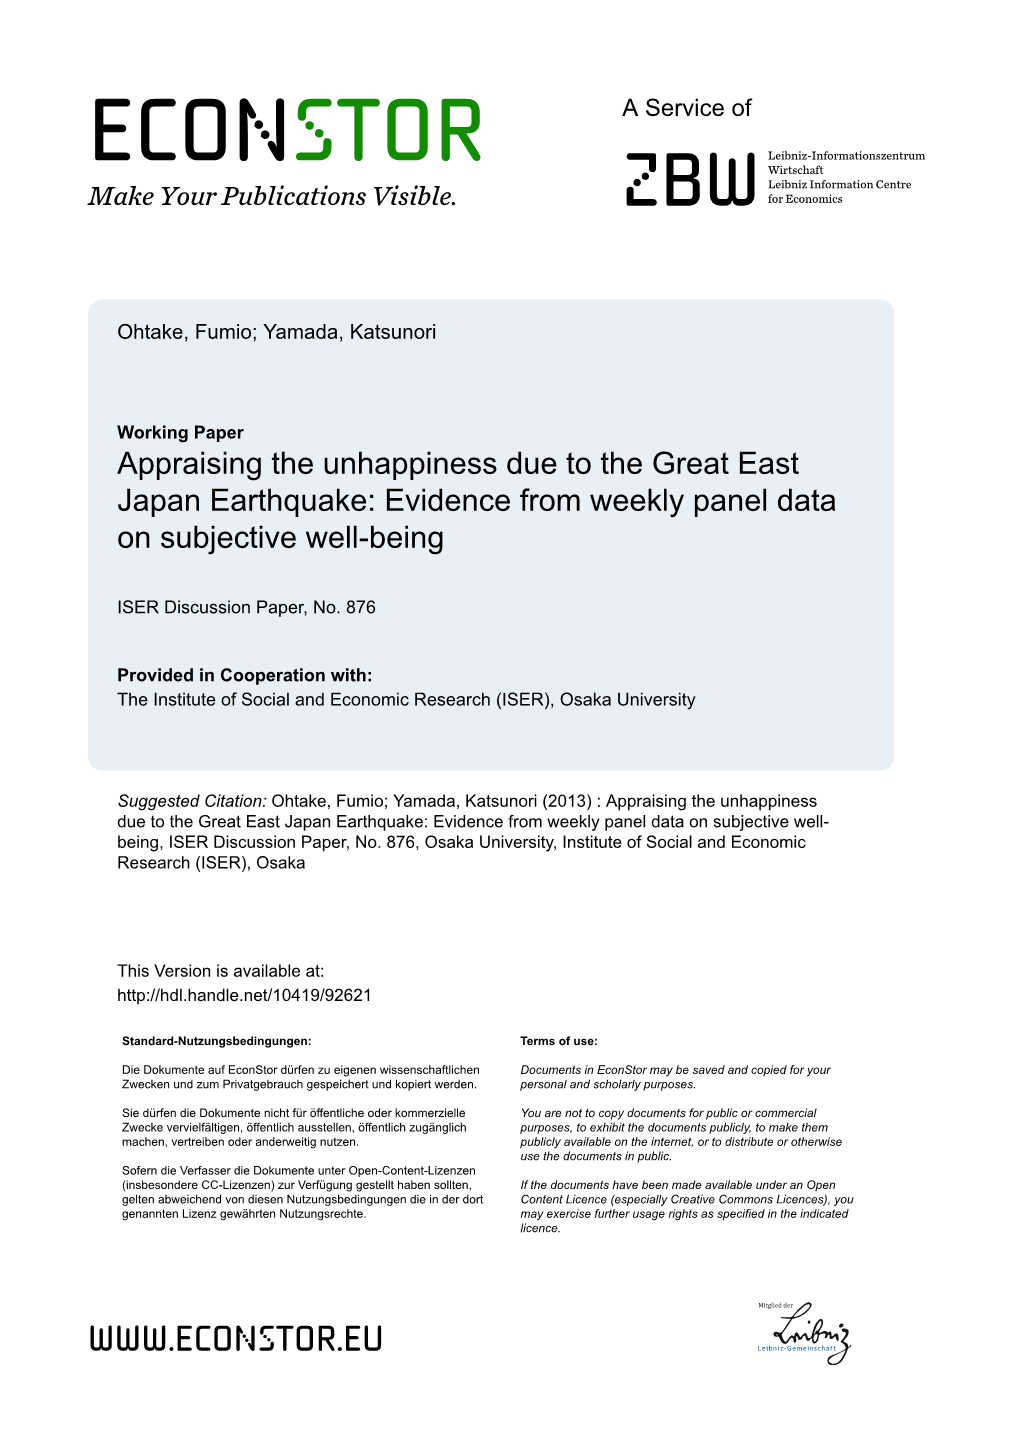 Appraising the Unhappiness Due to the Great East Japan Earthquake: Evidence from Weekly Panel Data on Subjective Well-Being